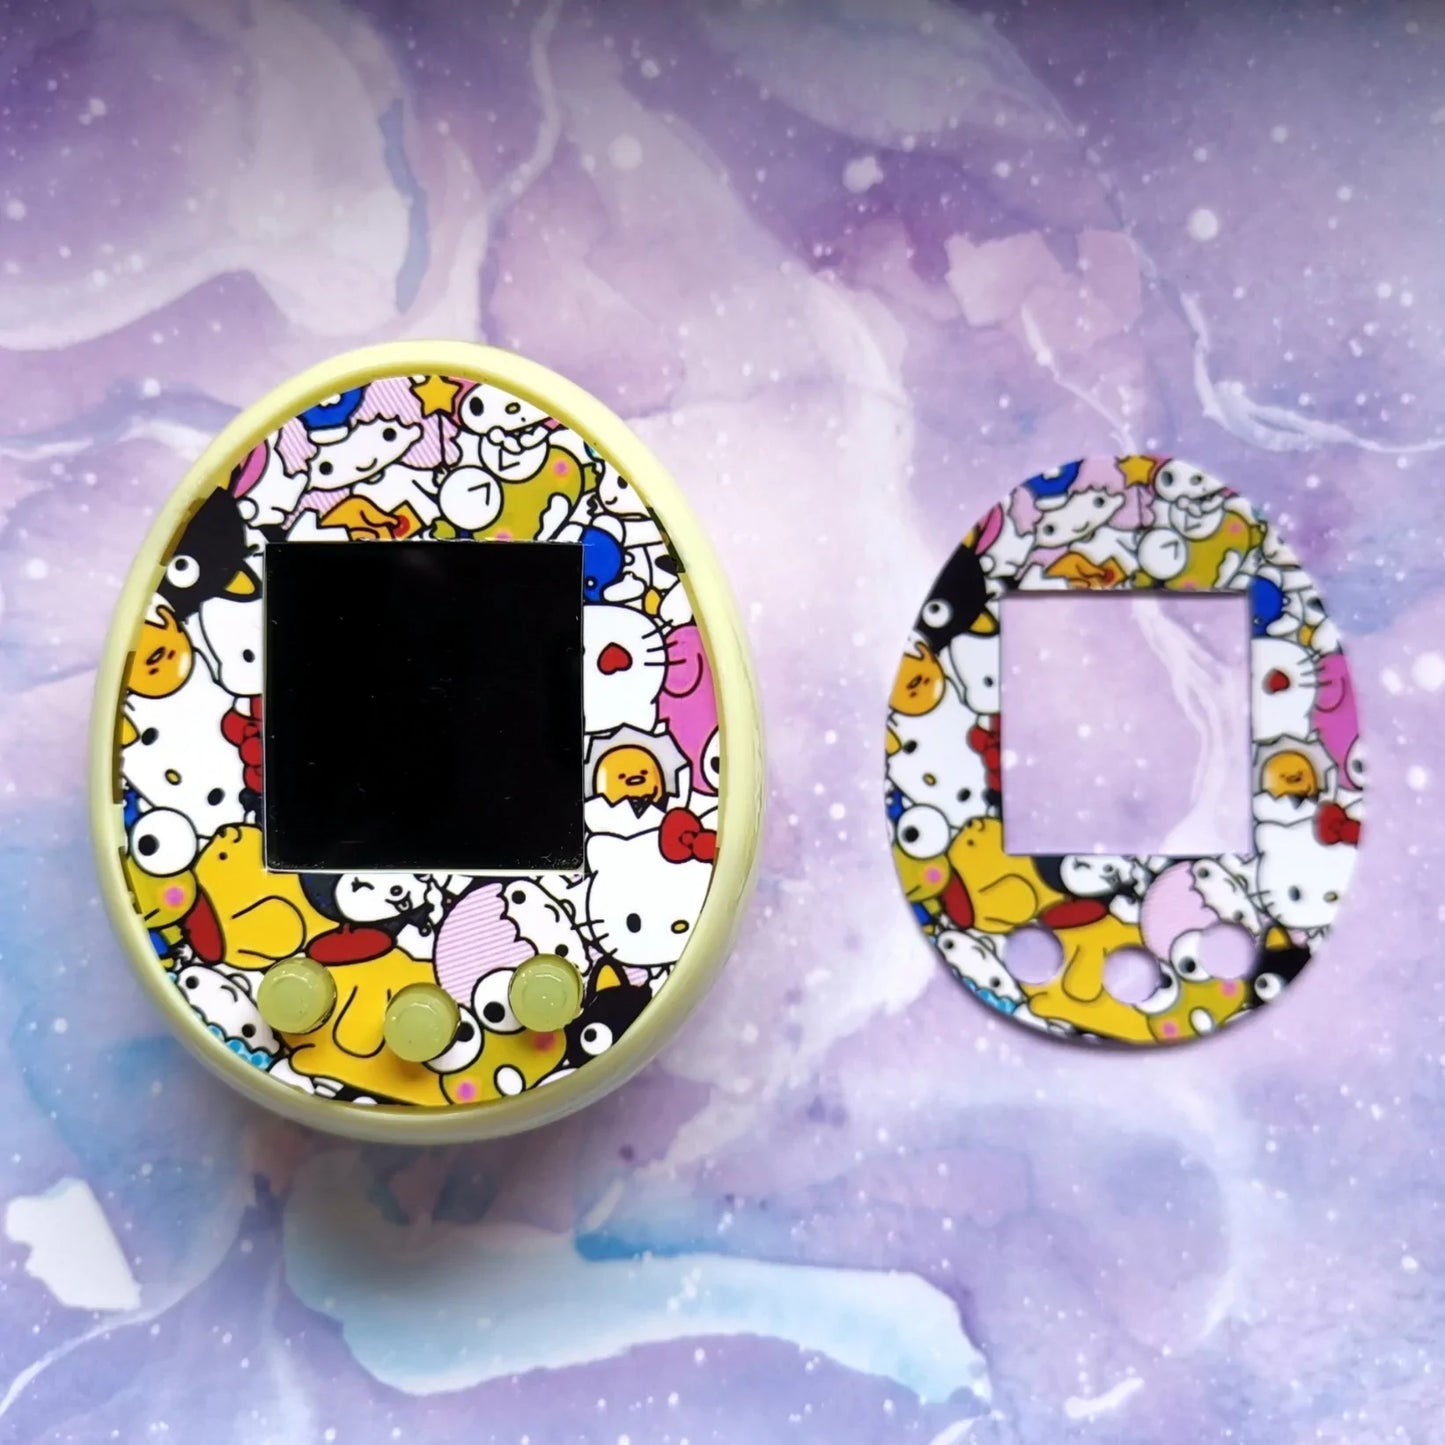 Tamagotchi Meets/On Faceplate - Hello Kitty Fuzzy N Chic